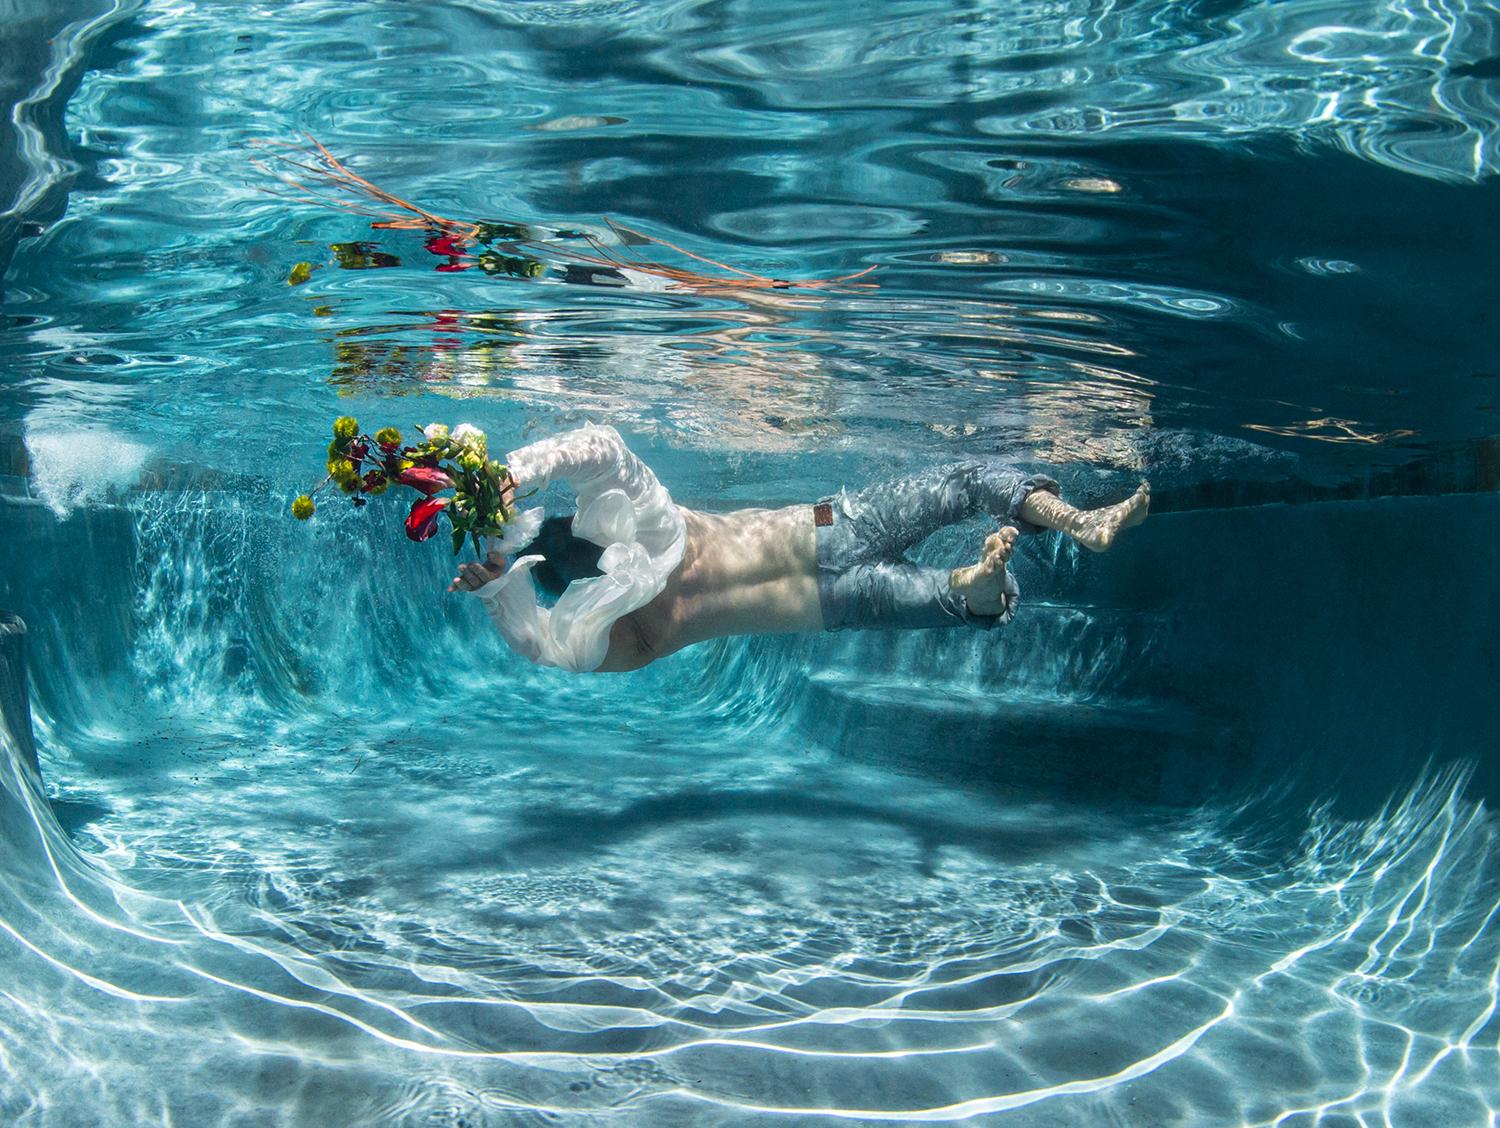 Cold Song III - underwater photograph - archival pigment print 16x23.5